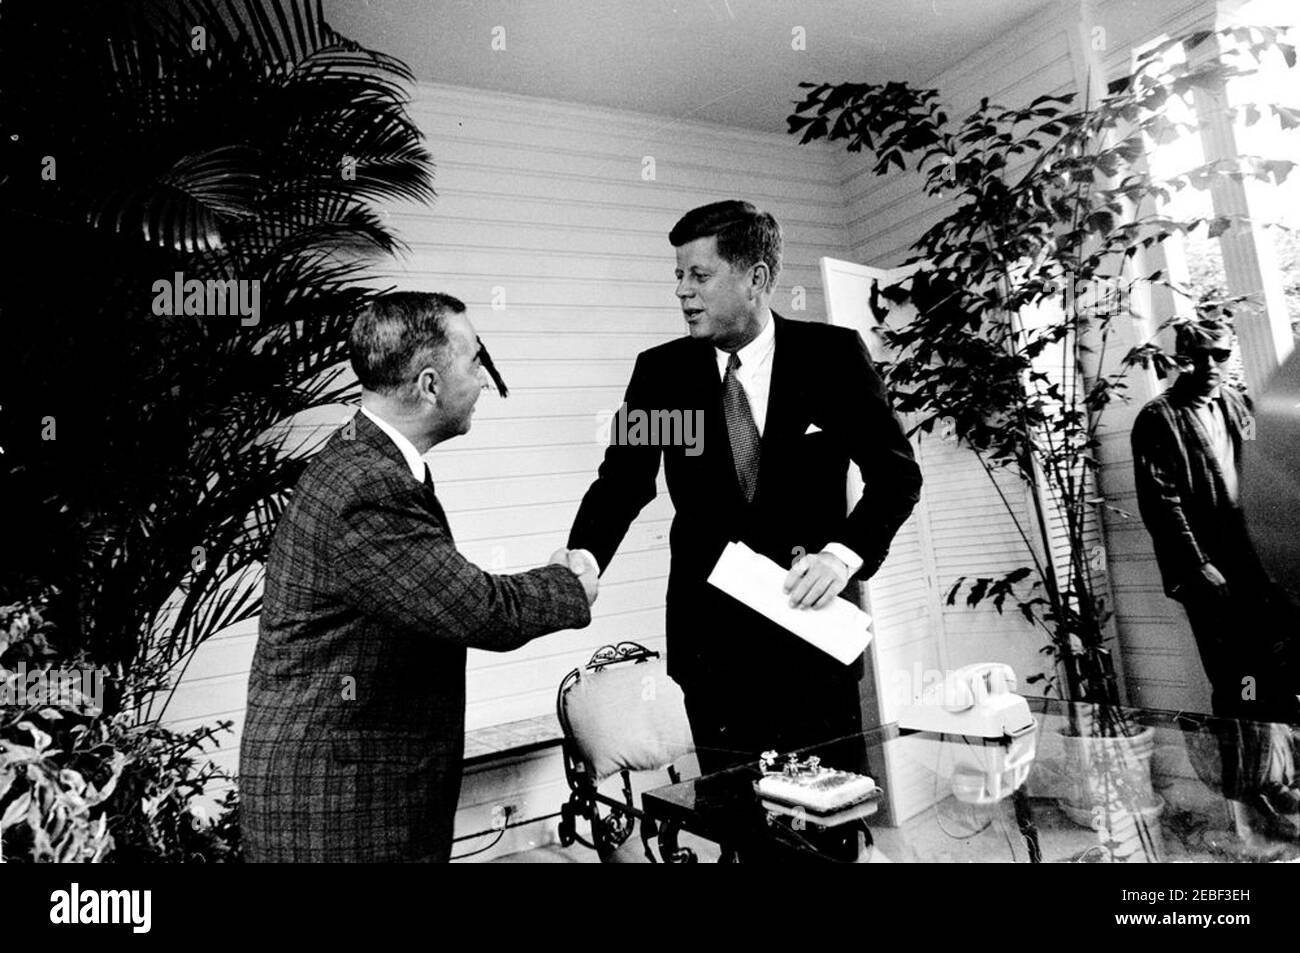 Opening ceremony for the Seattle Worldu0027s Fair from Palm Beach. President John F. Kennedy shakes hands with Robert Bright, of the American Telephone and Telegraph Company (ATu0026T), during the opening ceremony for the 1962 Seattle Worldu0027s Fair (also known as the Century 21 Exposition) from the residence of C. Michael Paul in Palm Beach, Florida. White House Secret Service agent, Clint Hill (wearing sunglasses), stands in background at right. President Kennedy delivered remarks by telephone and pressed a gold telegraph key (on patio table at bottom right) to open the fair via satelli Stock Photo